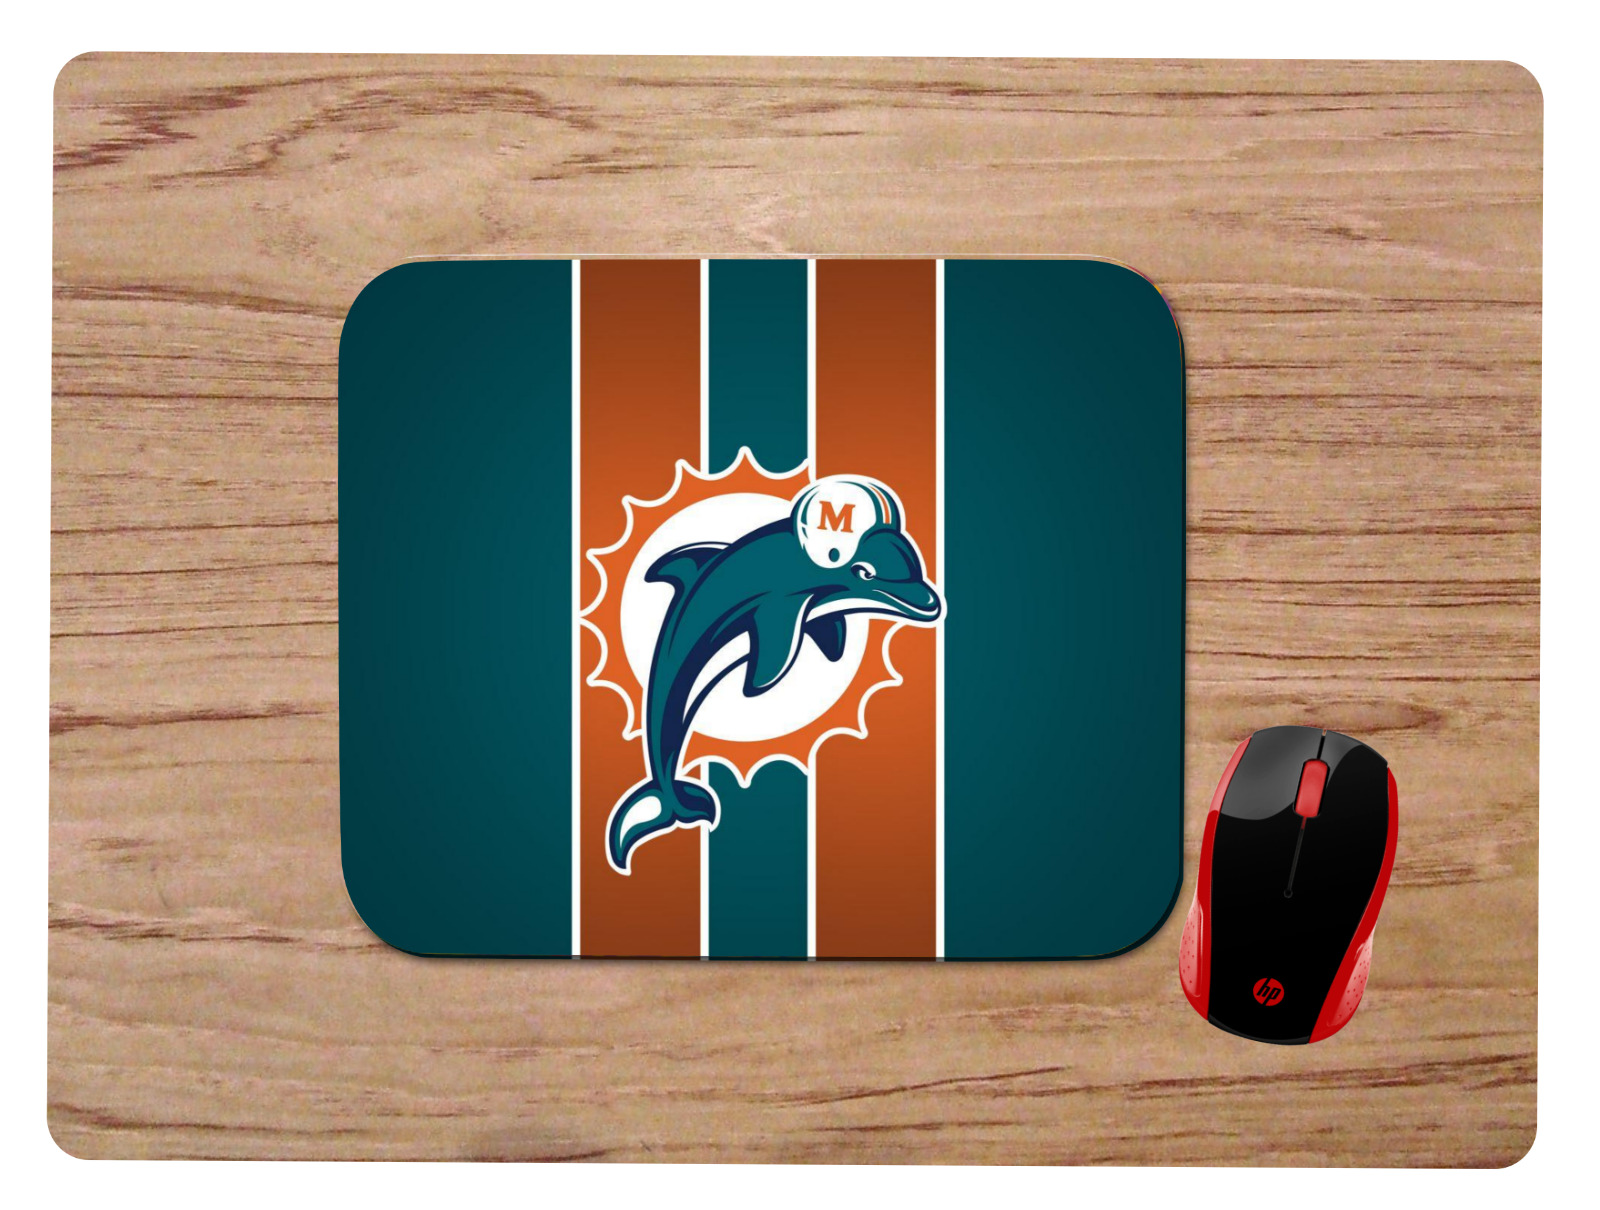 MIAMI DOLPHINS DESIGN MOUSEPAD MOUSE PAD HOME OFFICE GIFT NFL 